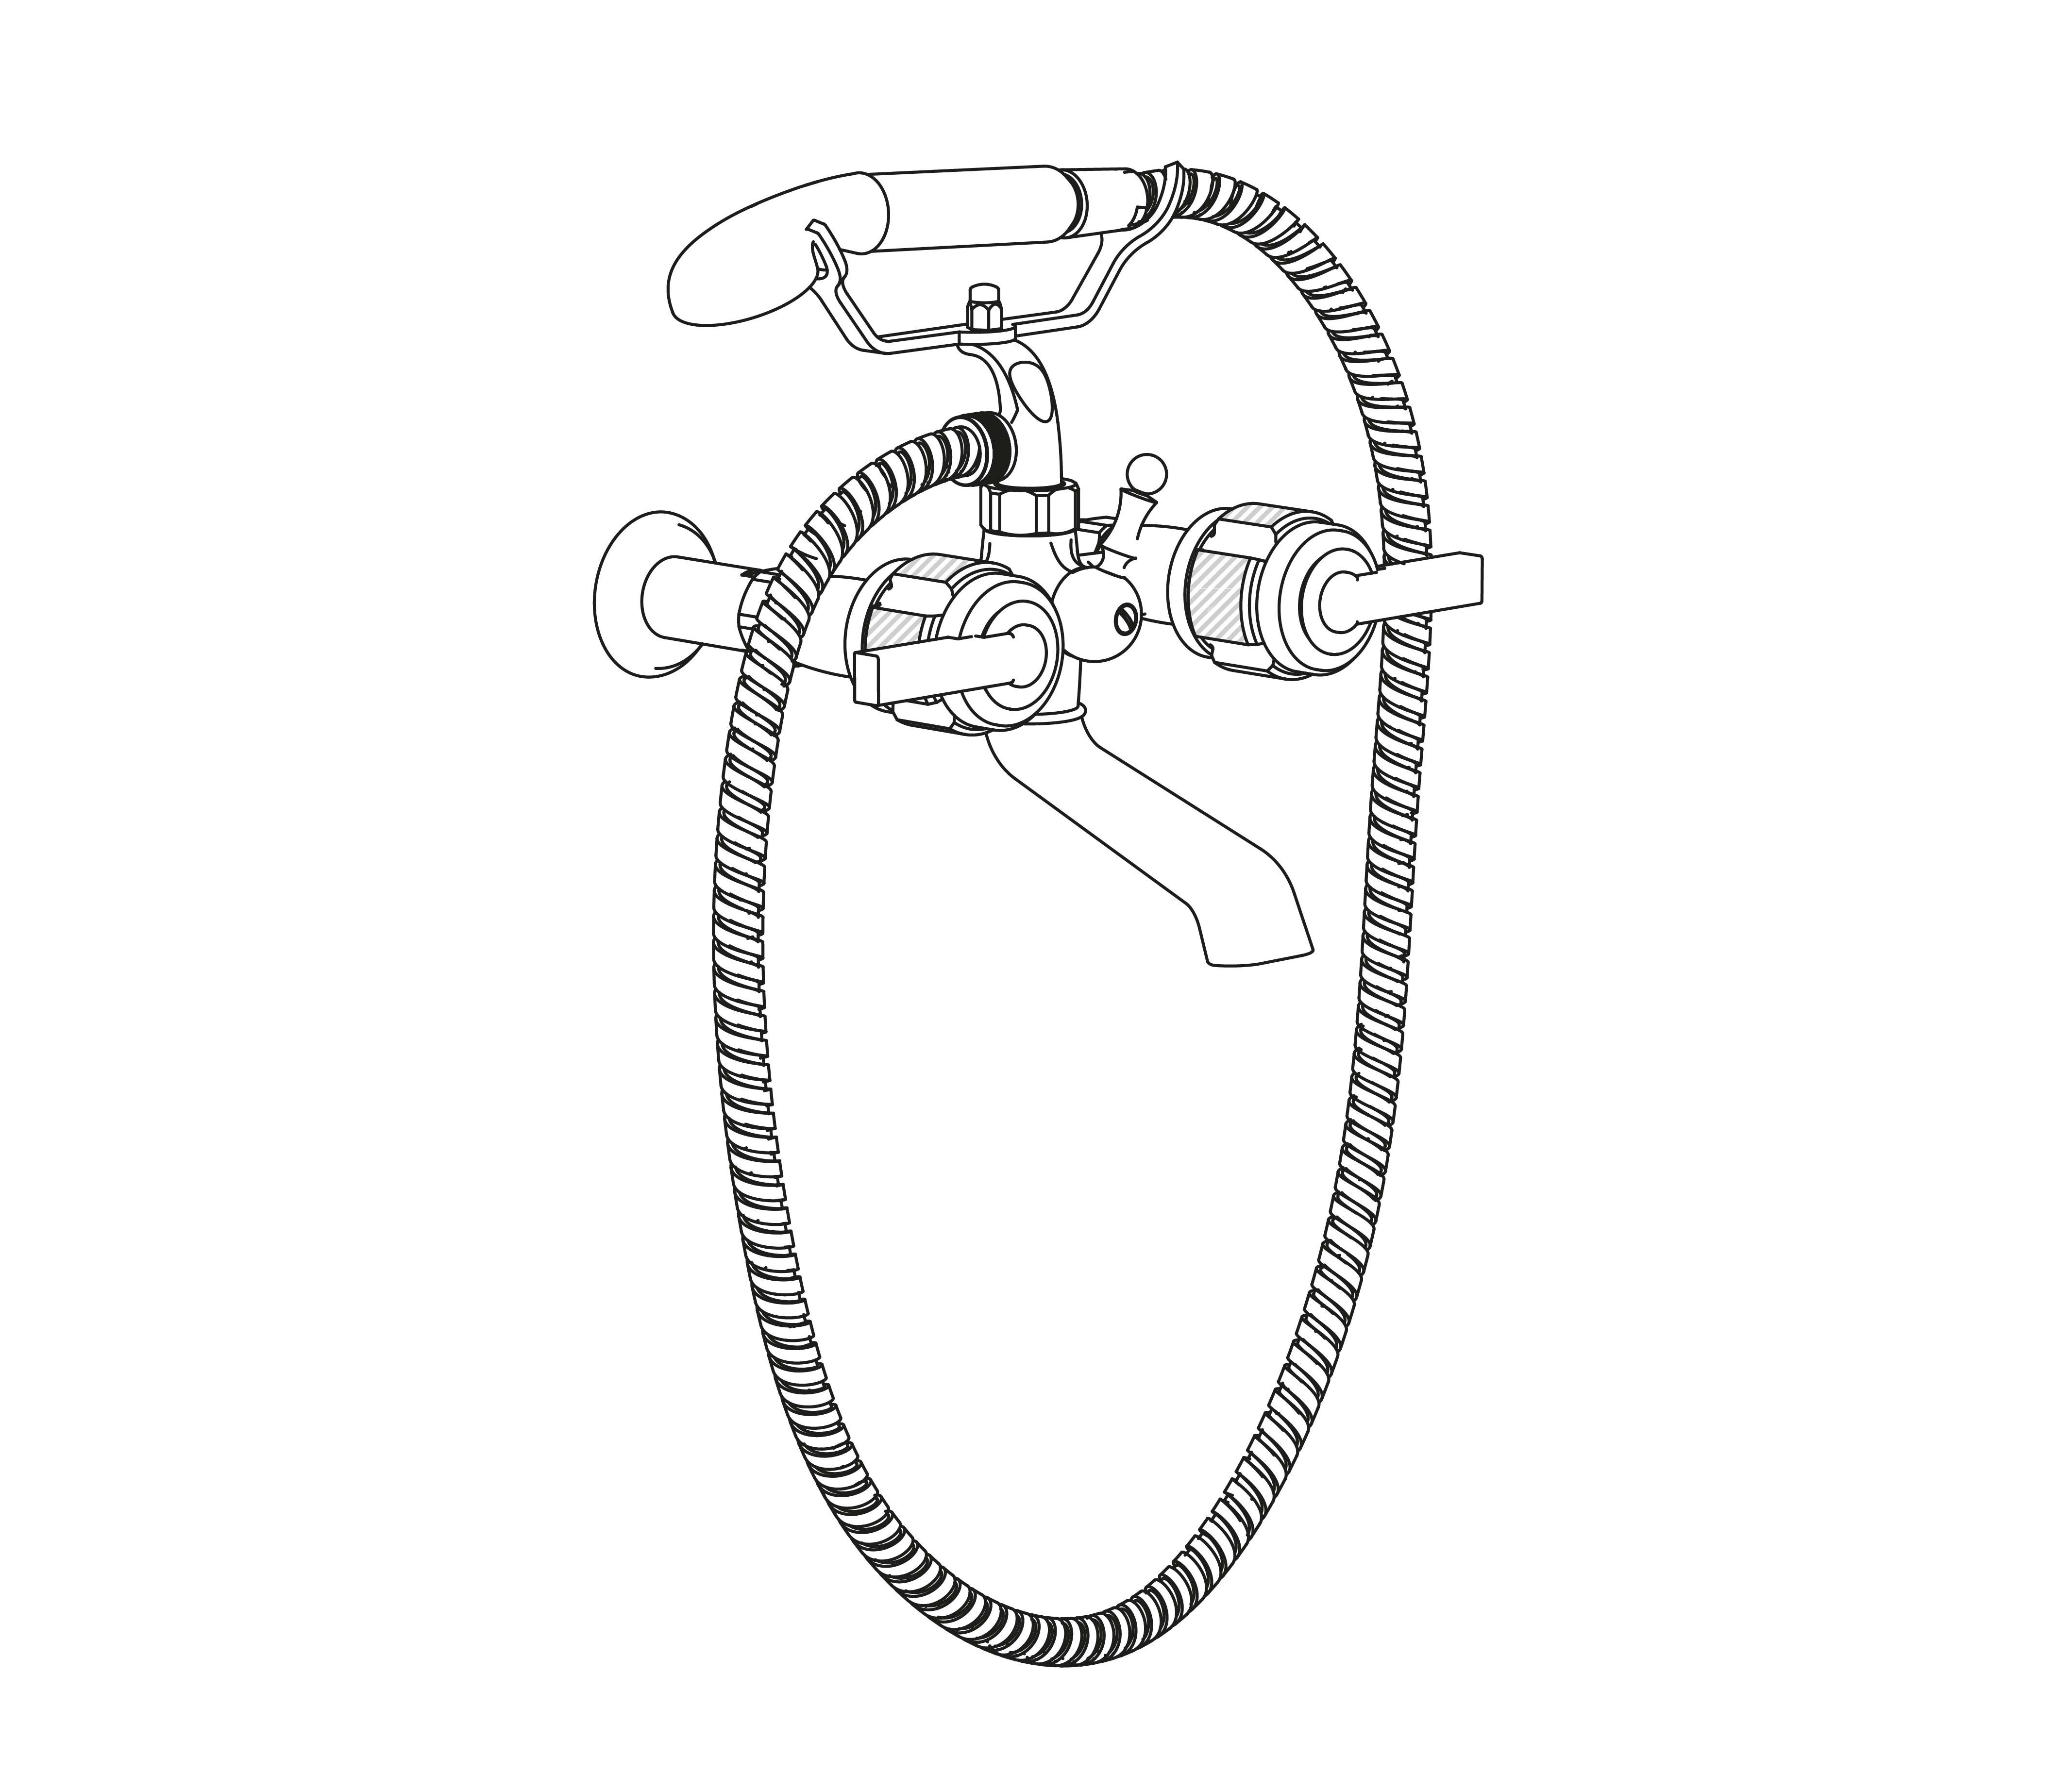 S87-3201 Wall mounted bath and shower mixer